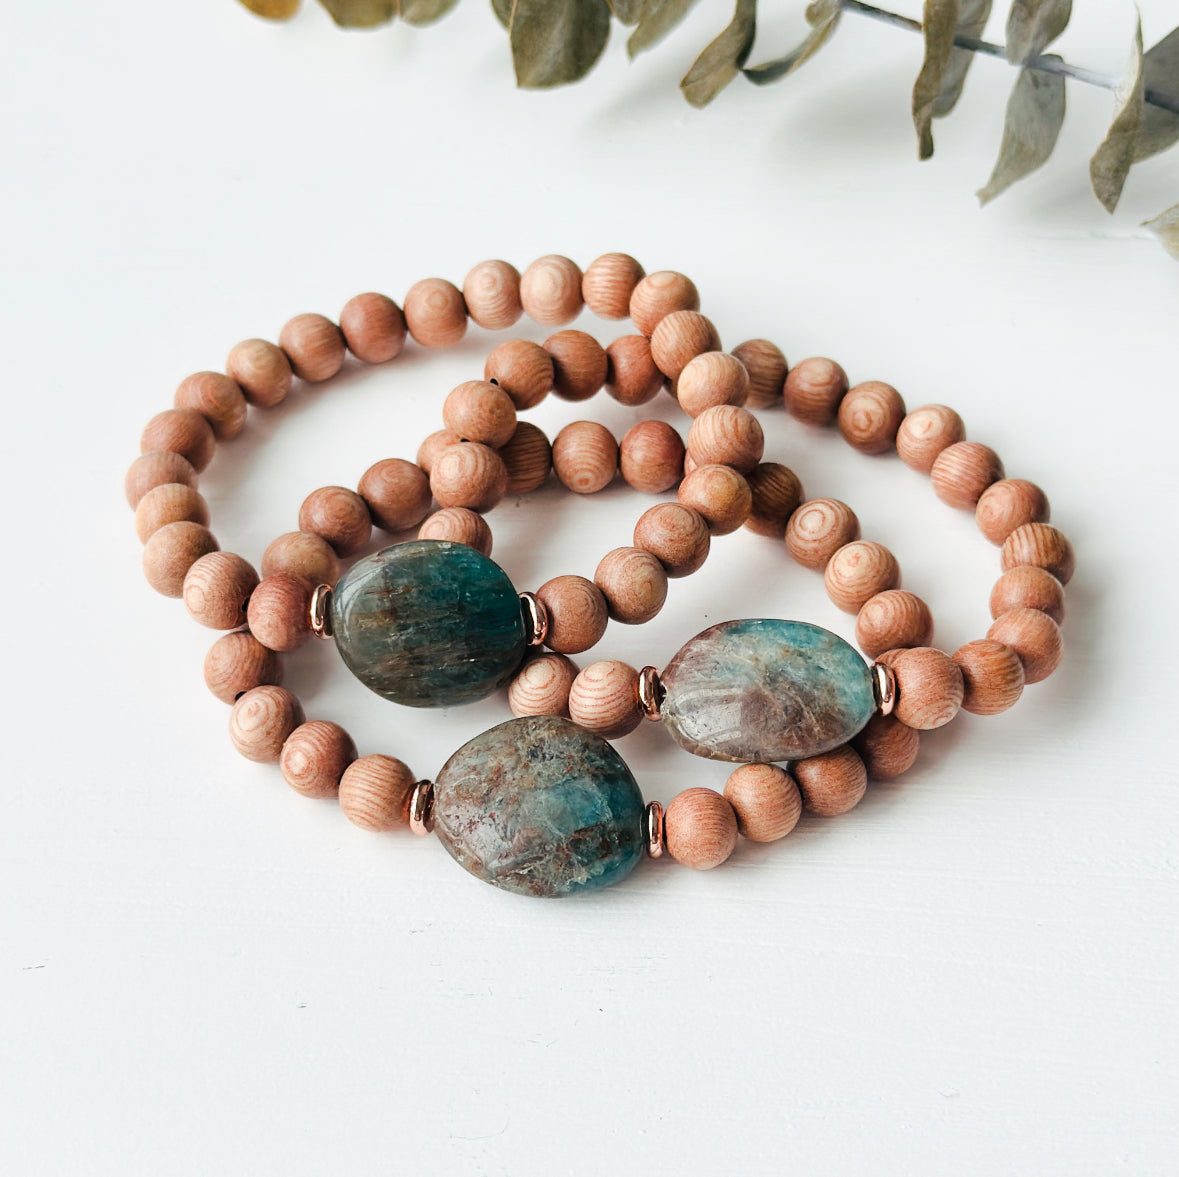 Apatite Focal bead with rosewood beads bracelet